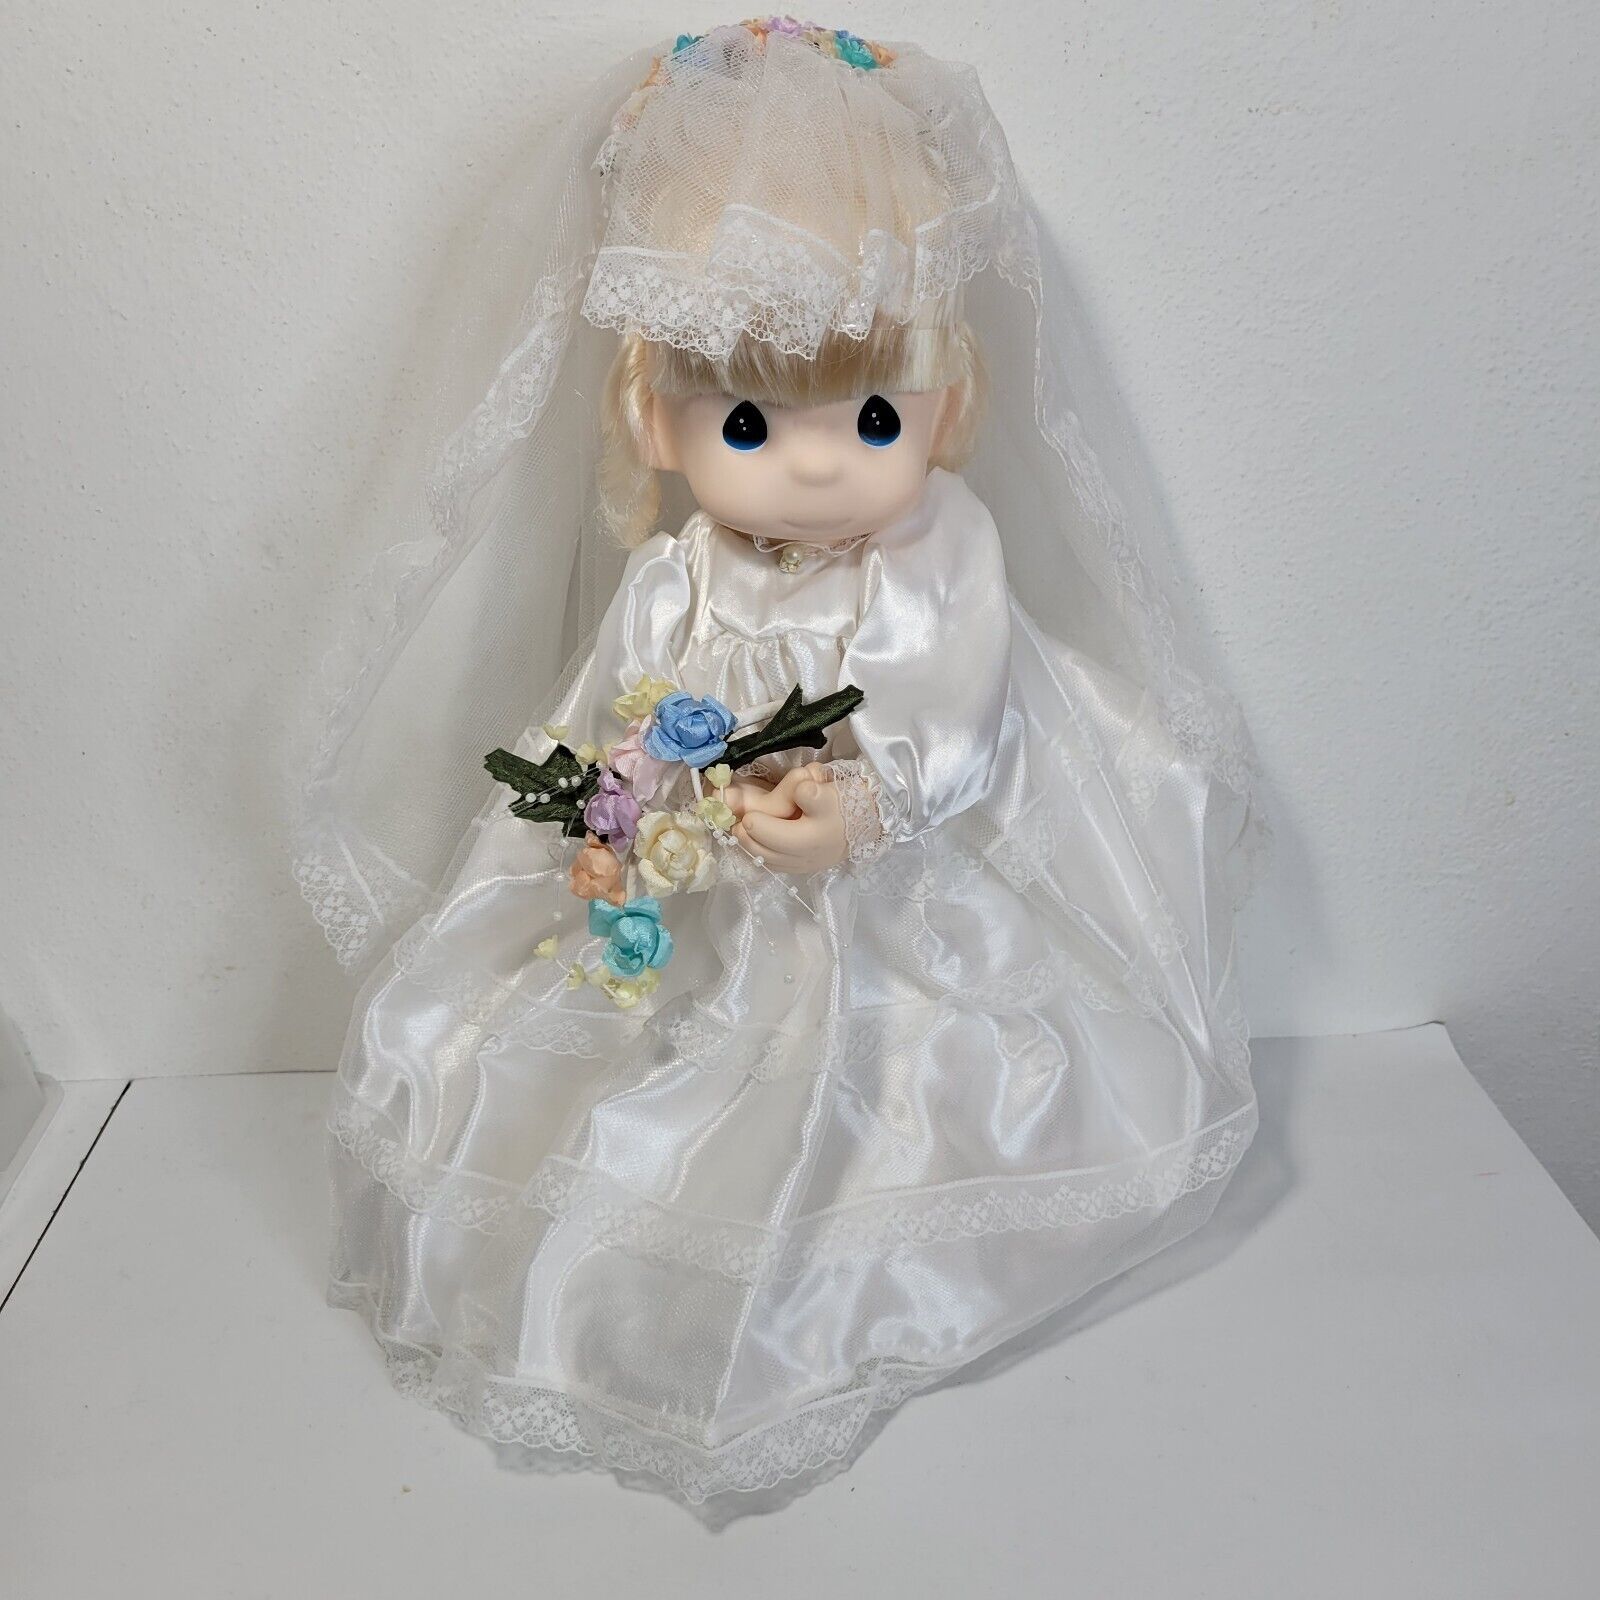 Precious Moments Jessi Bride Doll With Stand 1985 Samuel J Butcher Applause 16" - $24.16